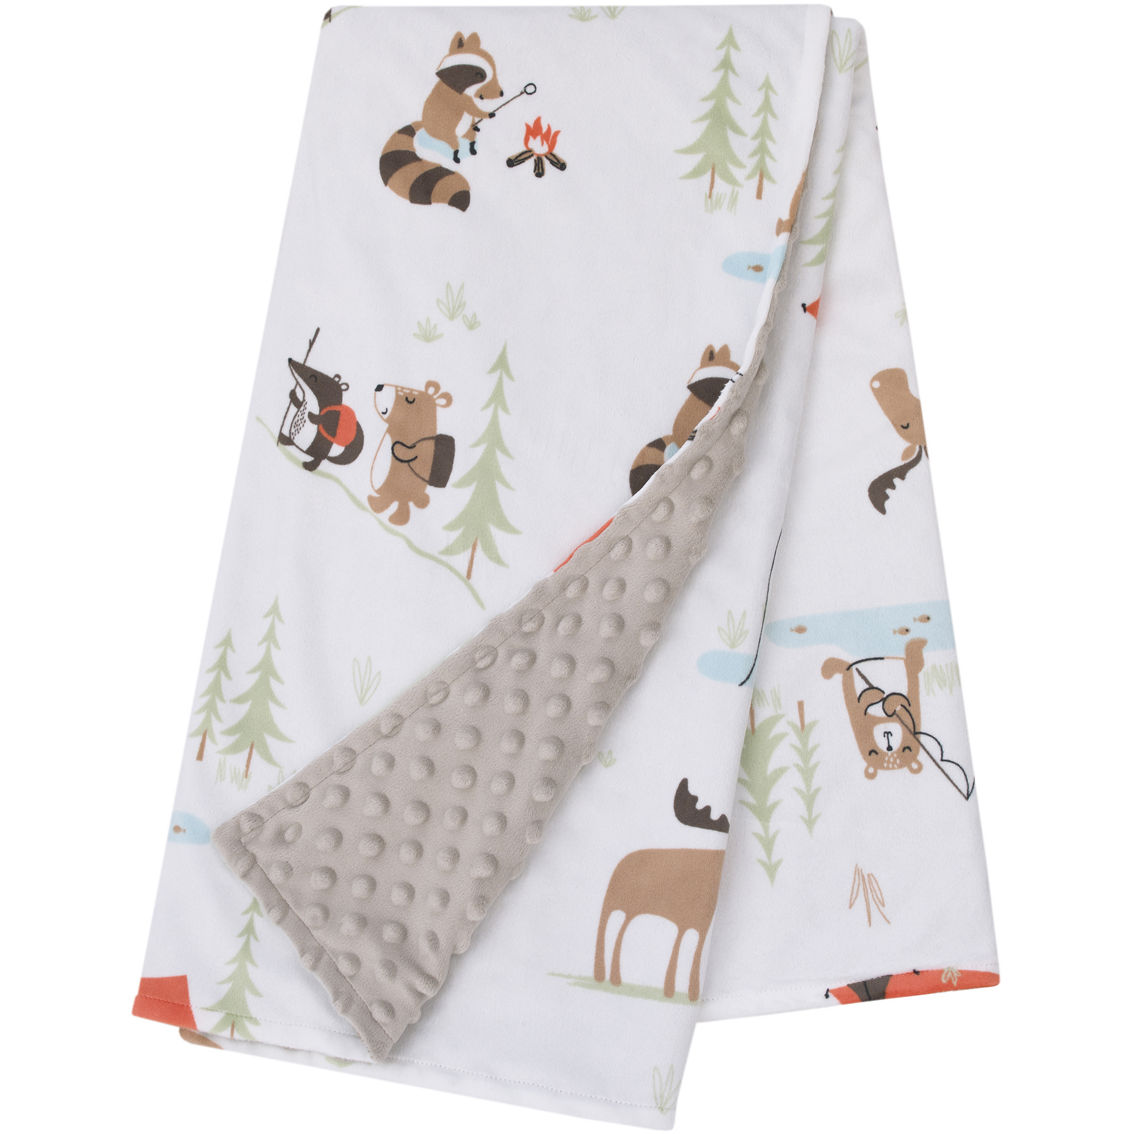 Little Bedding by NoJo Camping Plush Blanket - Image 3 of 4